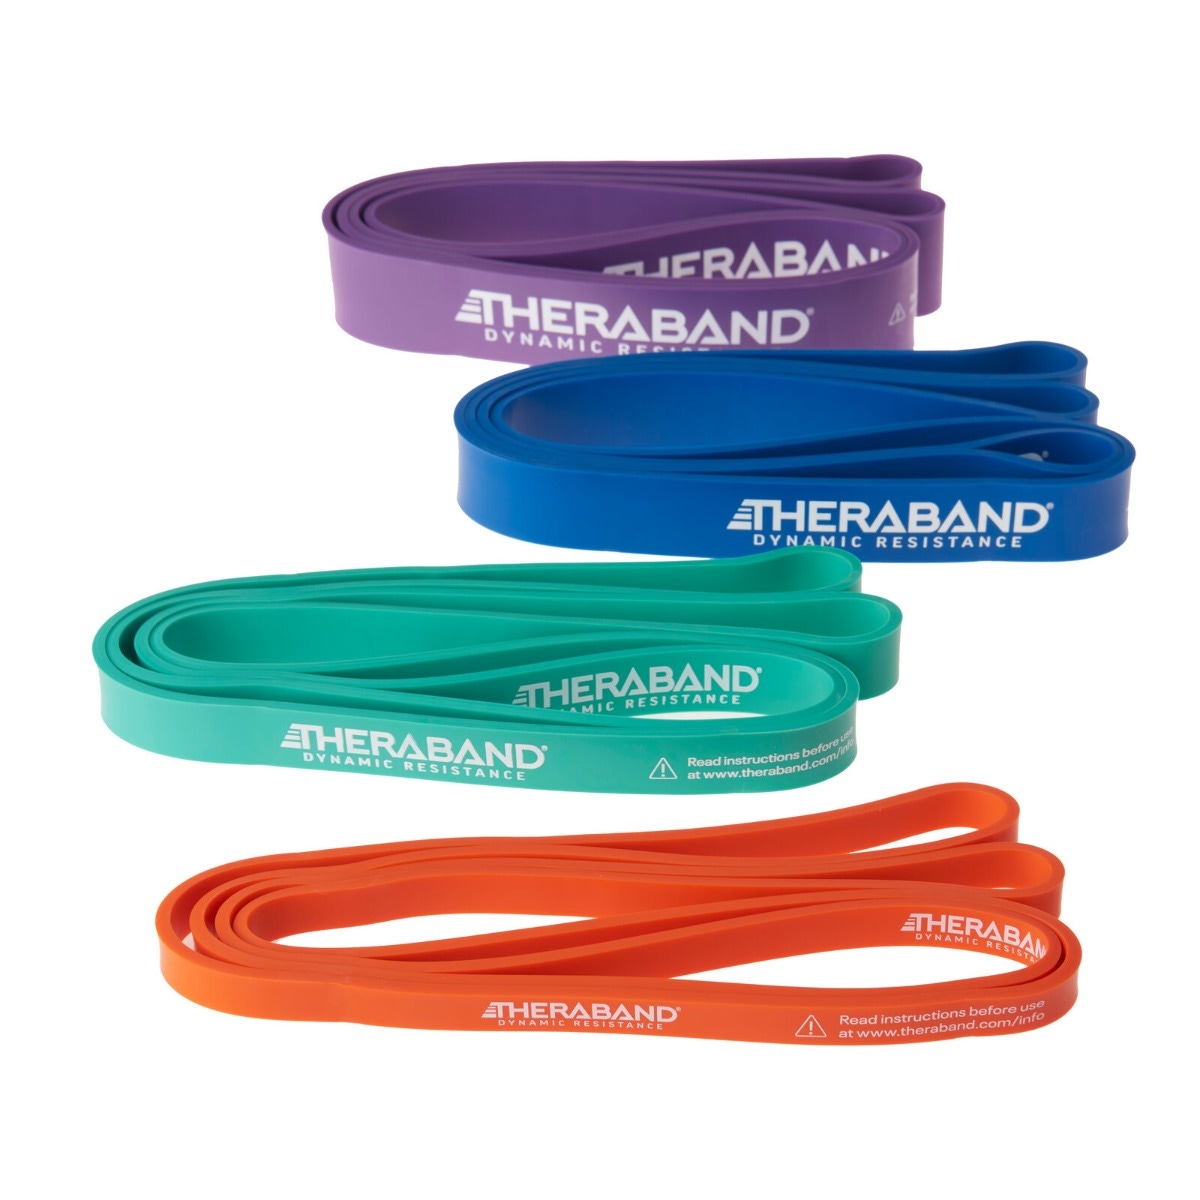 https://www.medco-athletics.com/media/catalog/product/t/h/theraband_high_resistance_bands.jpg?optimize=low&bg-color=255,255,255&fit=bounds&height=&width=